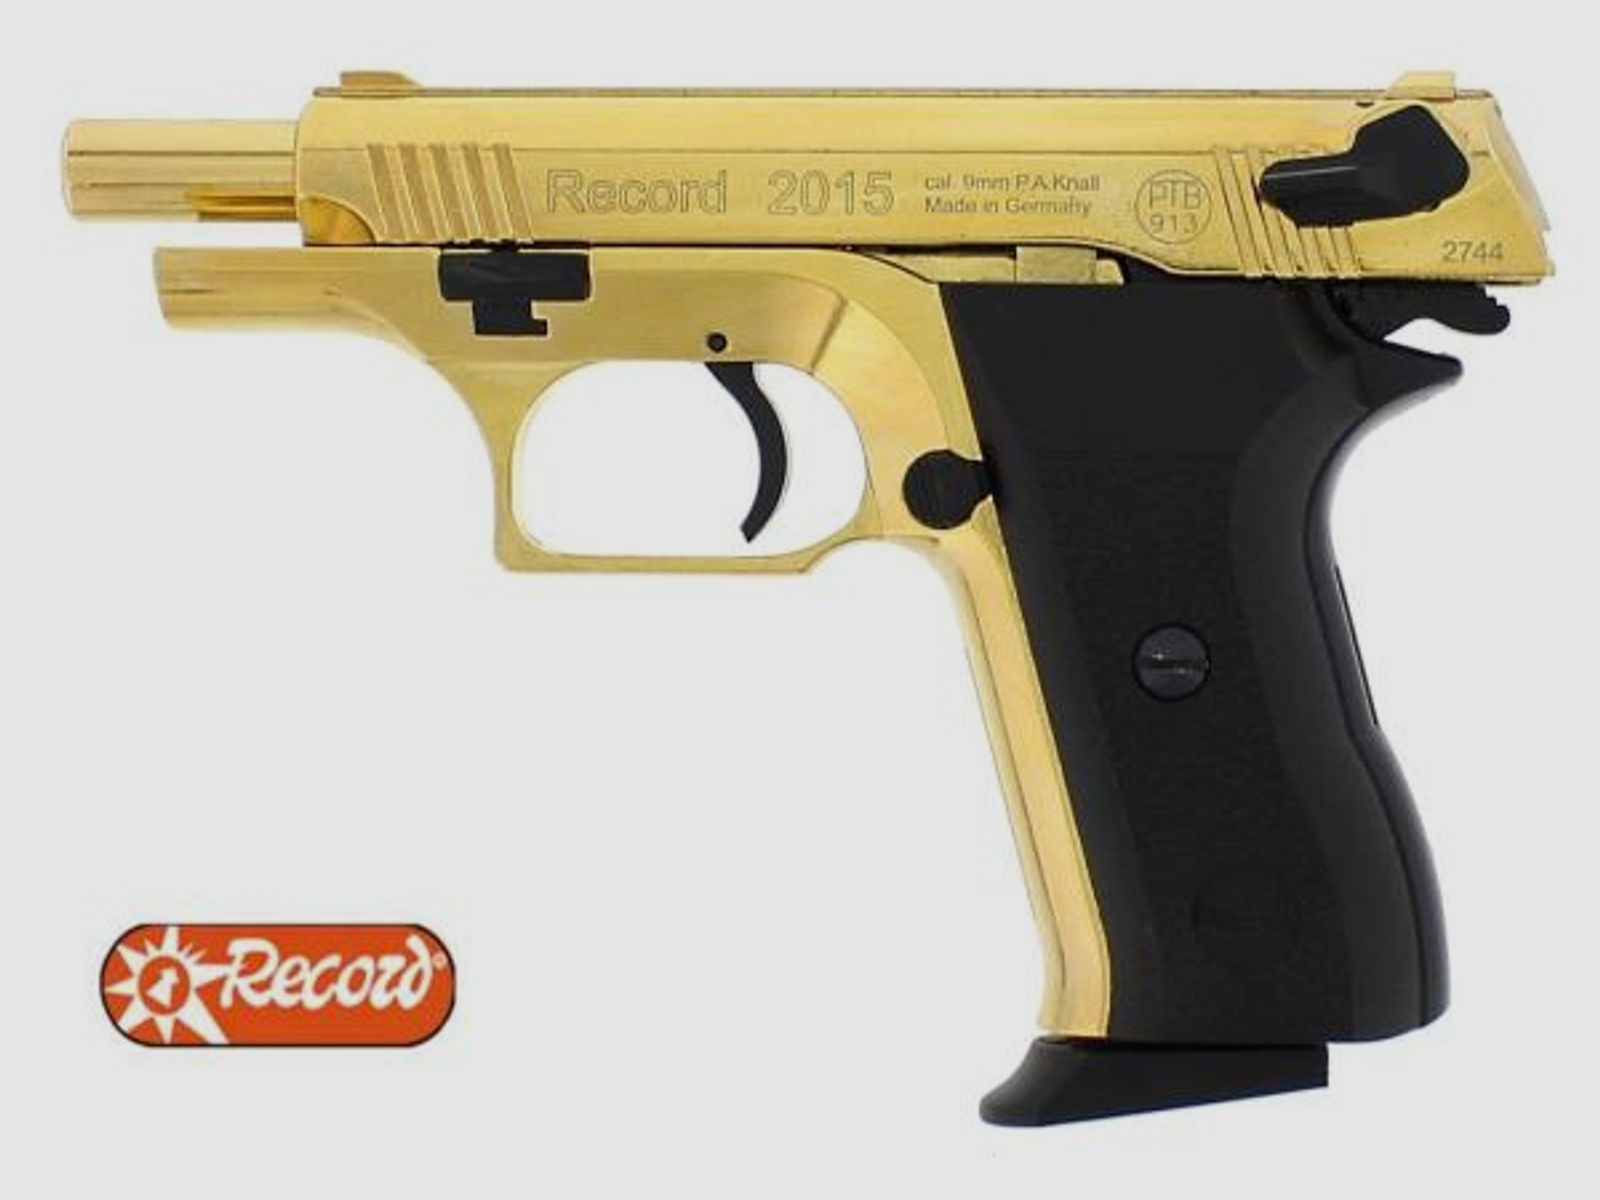 RECORD Gaspistole (SRS) 2015 Gold Kal. 9mm P.A.